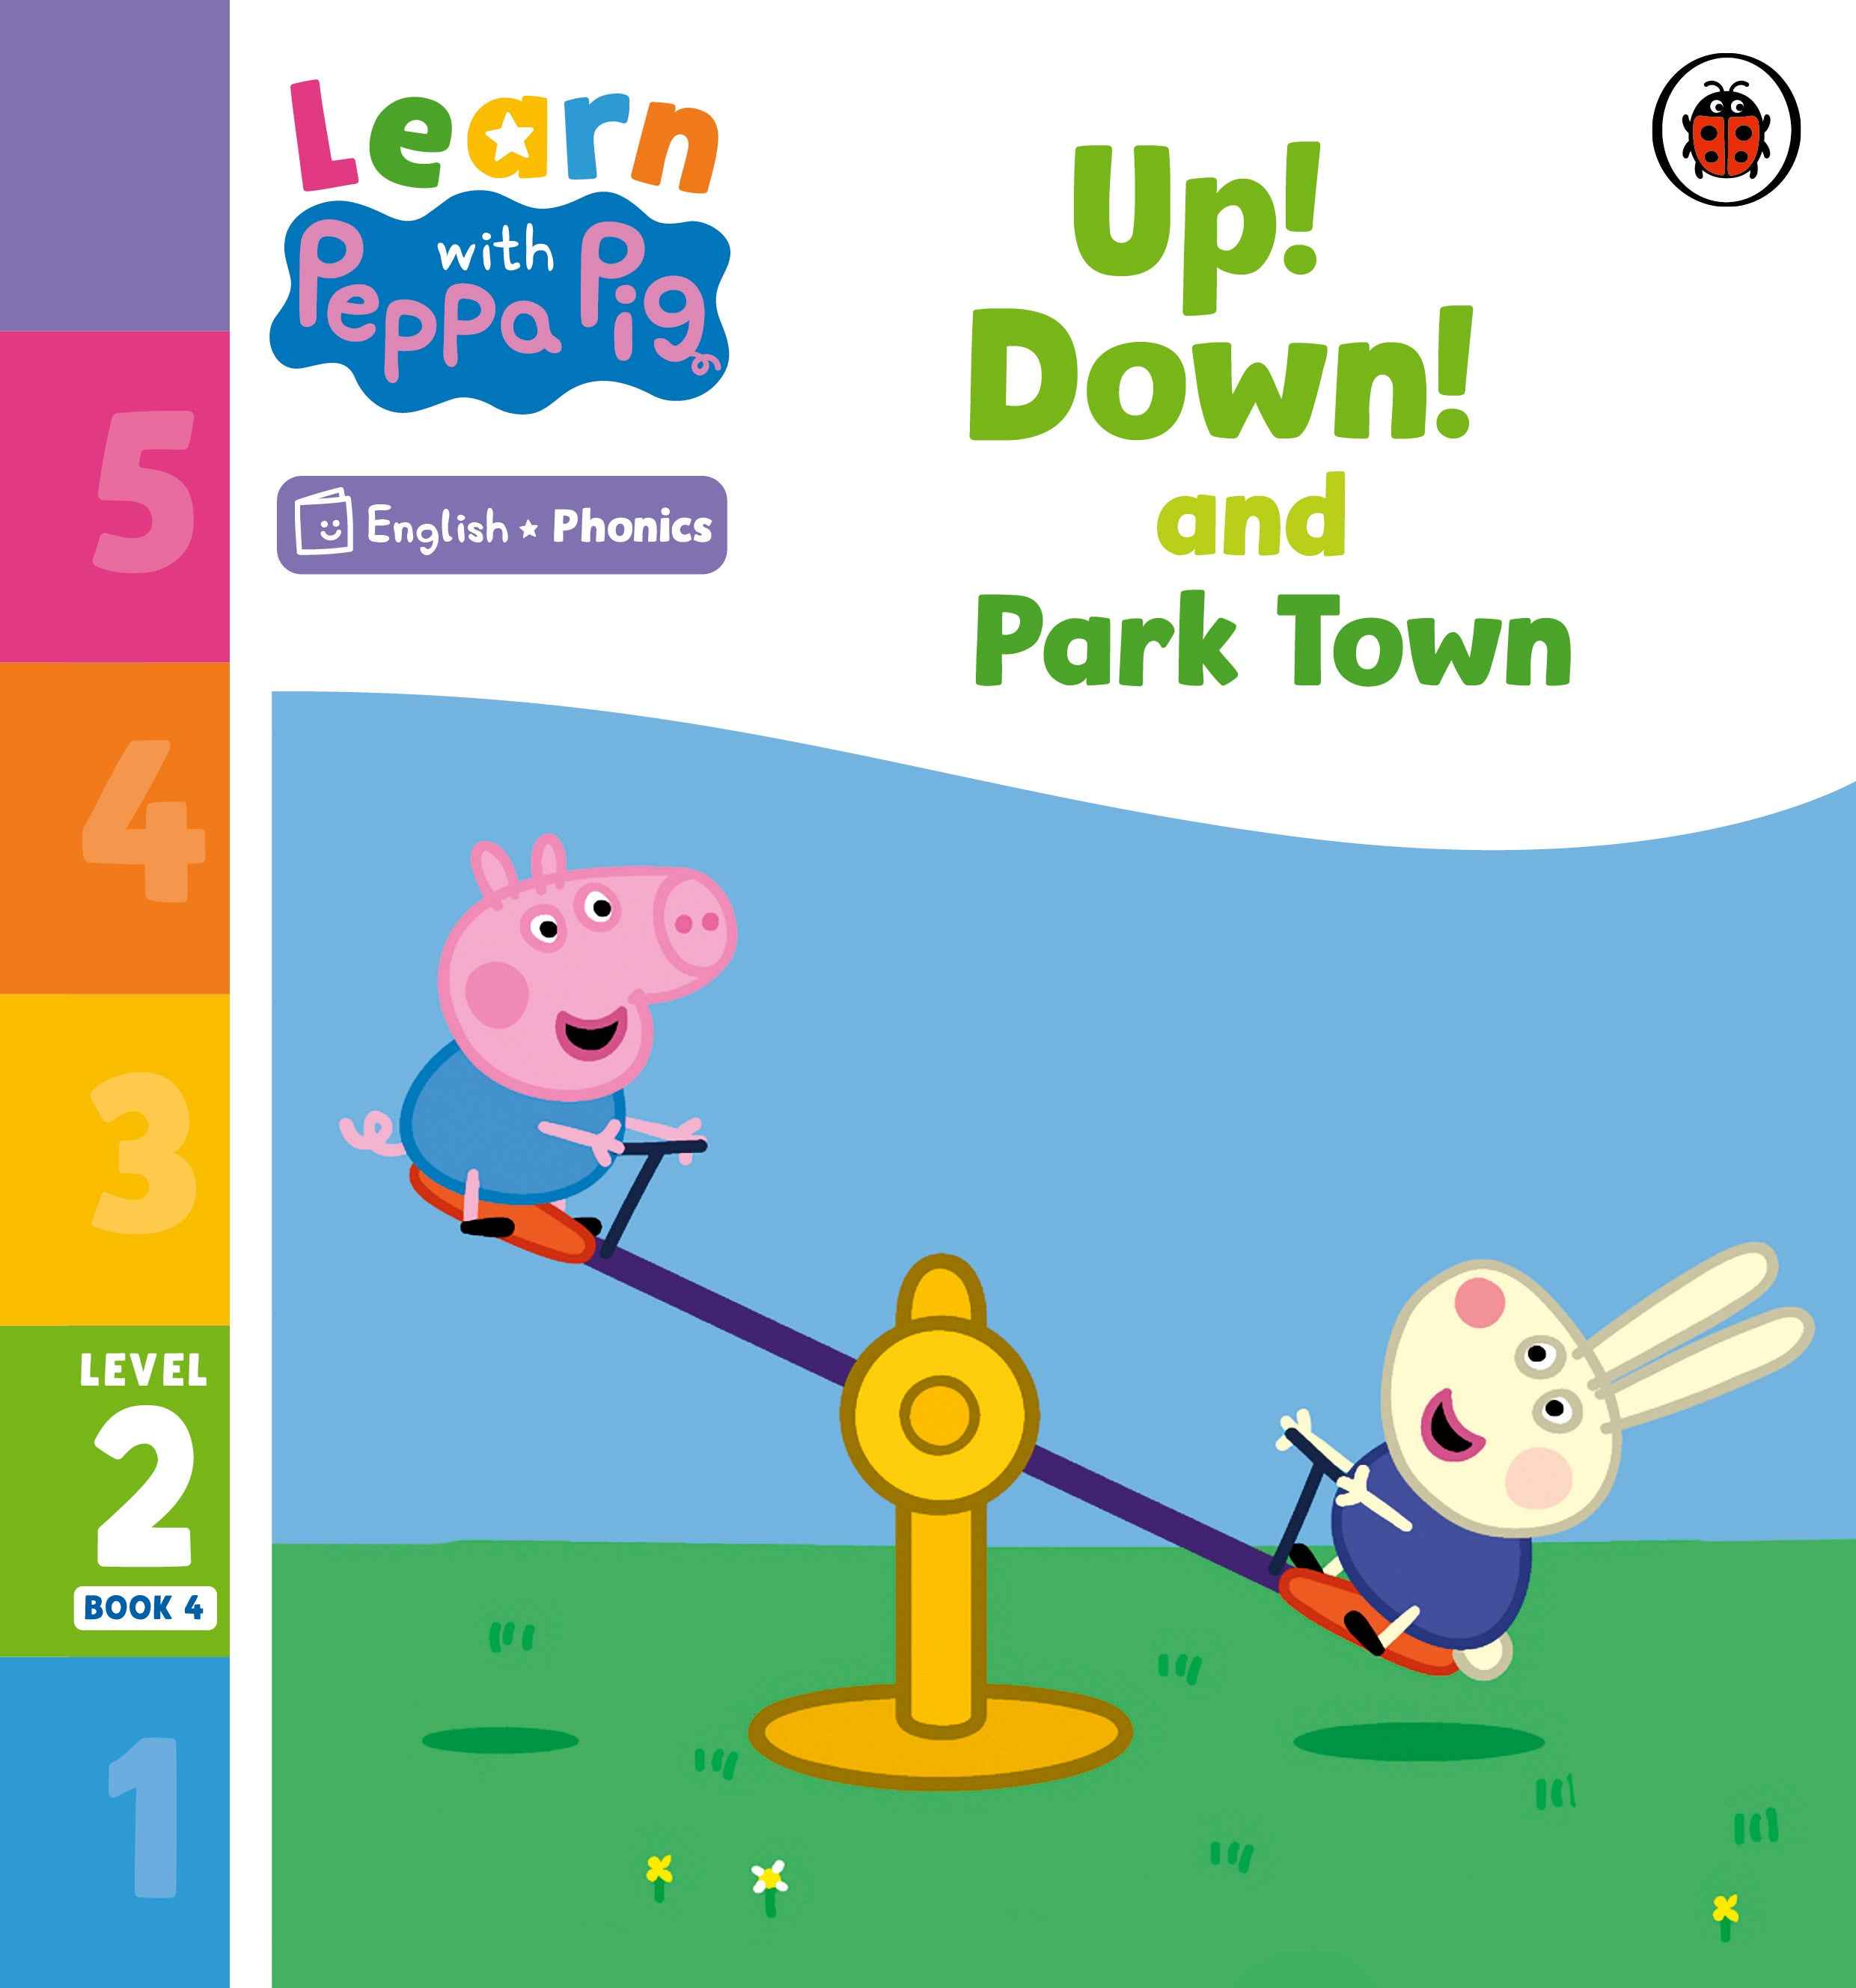 Up! Down! and Park Town